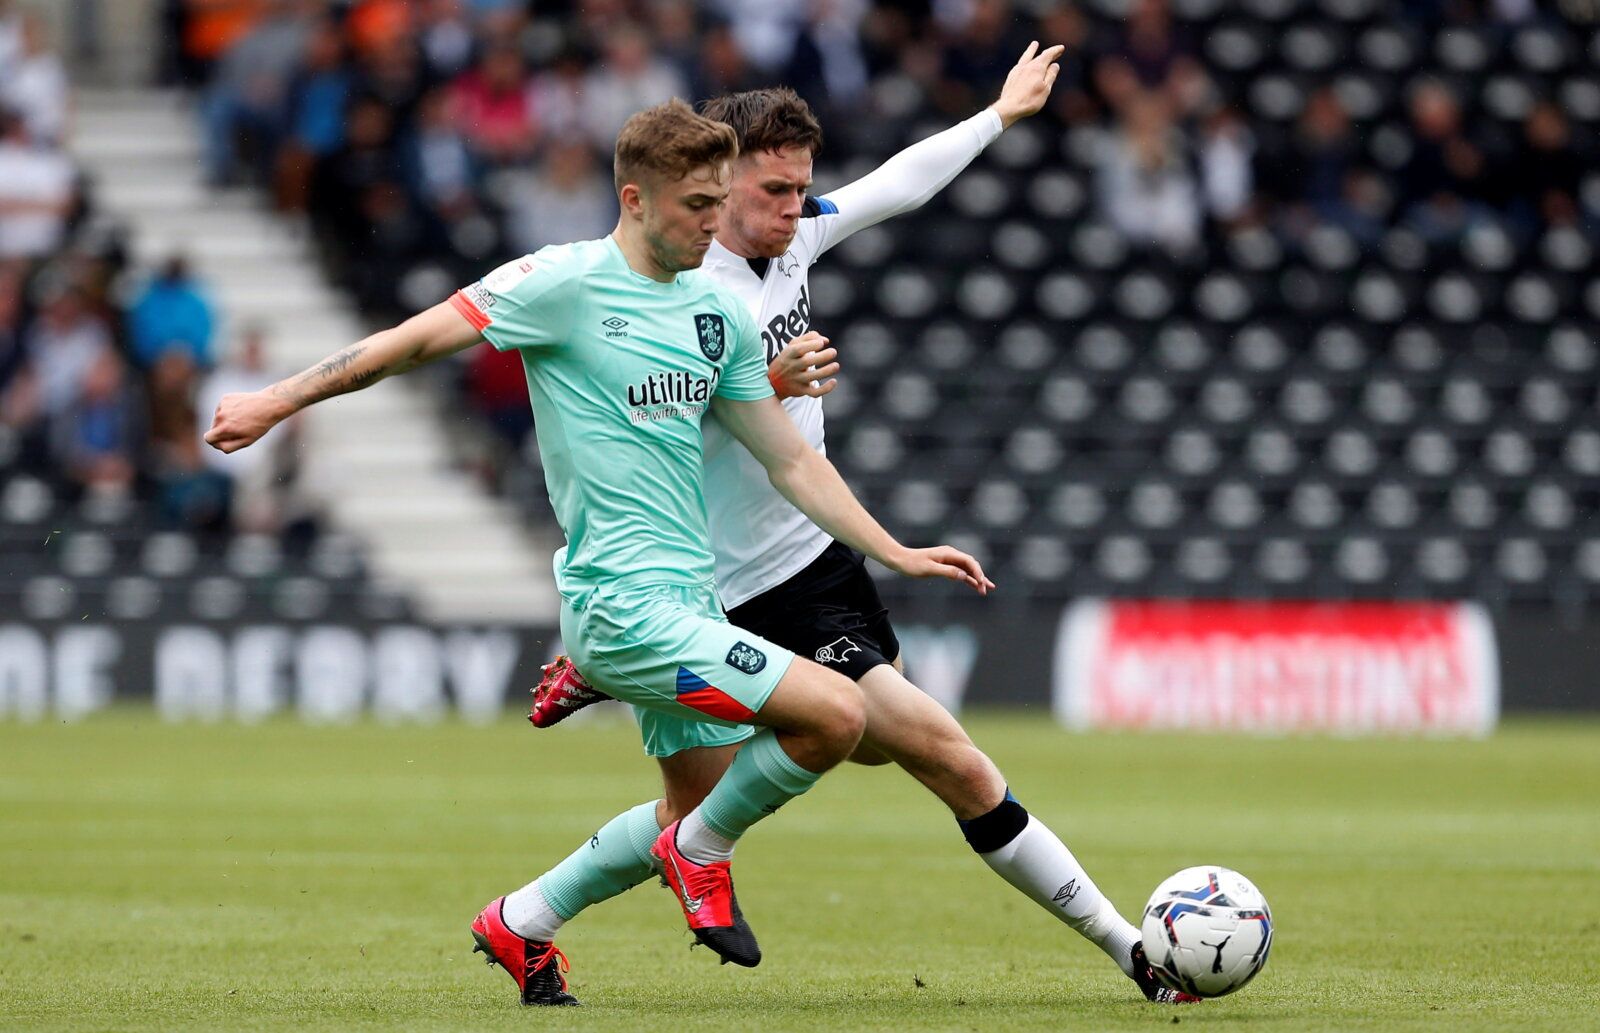 Soccer Football - Championship - Derby County v Huddersfield Town - Pride Park, Derby, Britain - August 7, 2021 Huddersfield Town's Scott High in action with Derby County's Max Bird   Action Images/Craig Brough